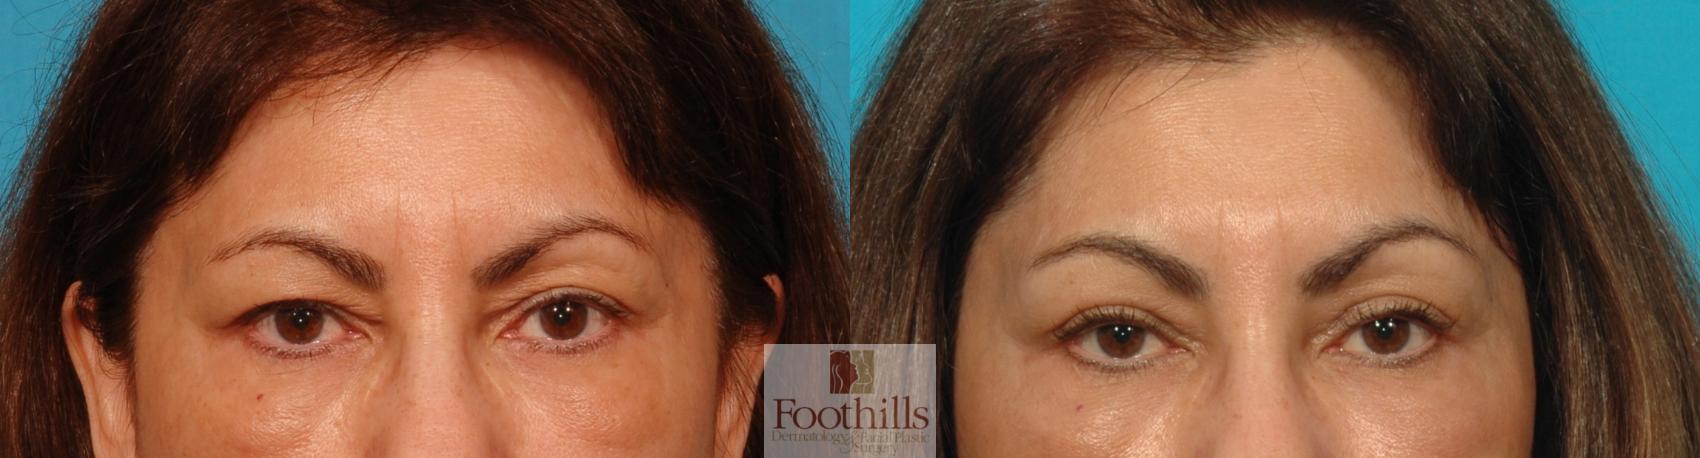 Blepharoplasty (Eyelid Surgery) Case 22 Before & After View #1 | Tucson, AZ | Foothills Facial Plastic Surgery